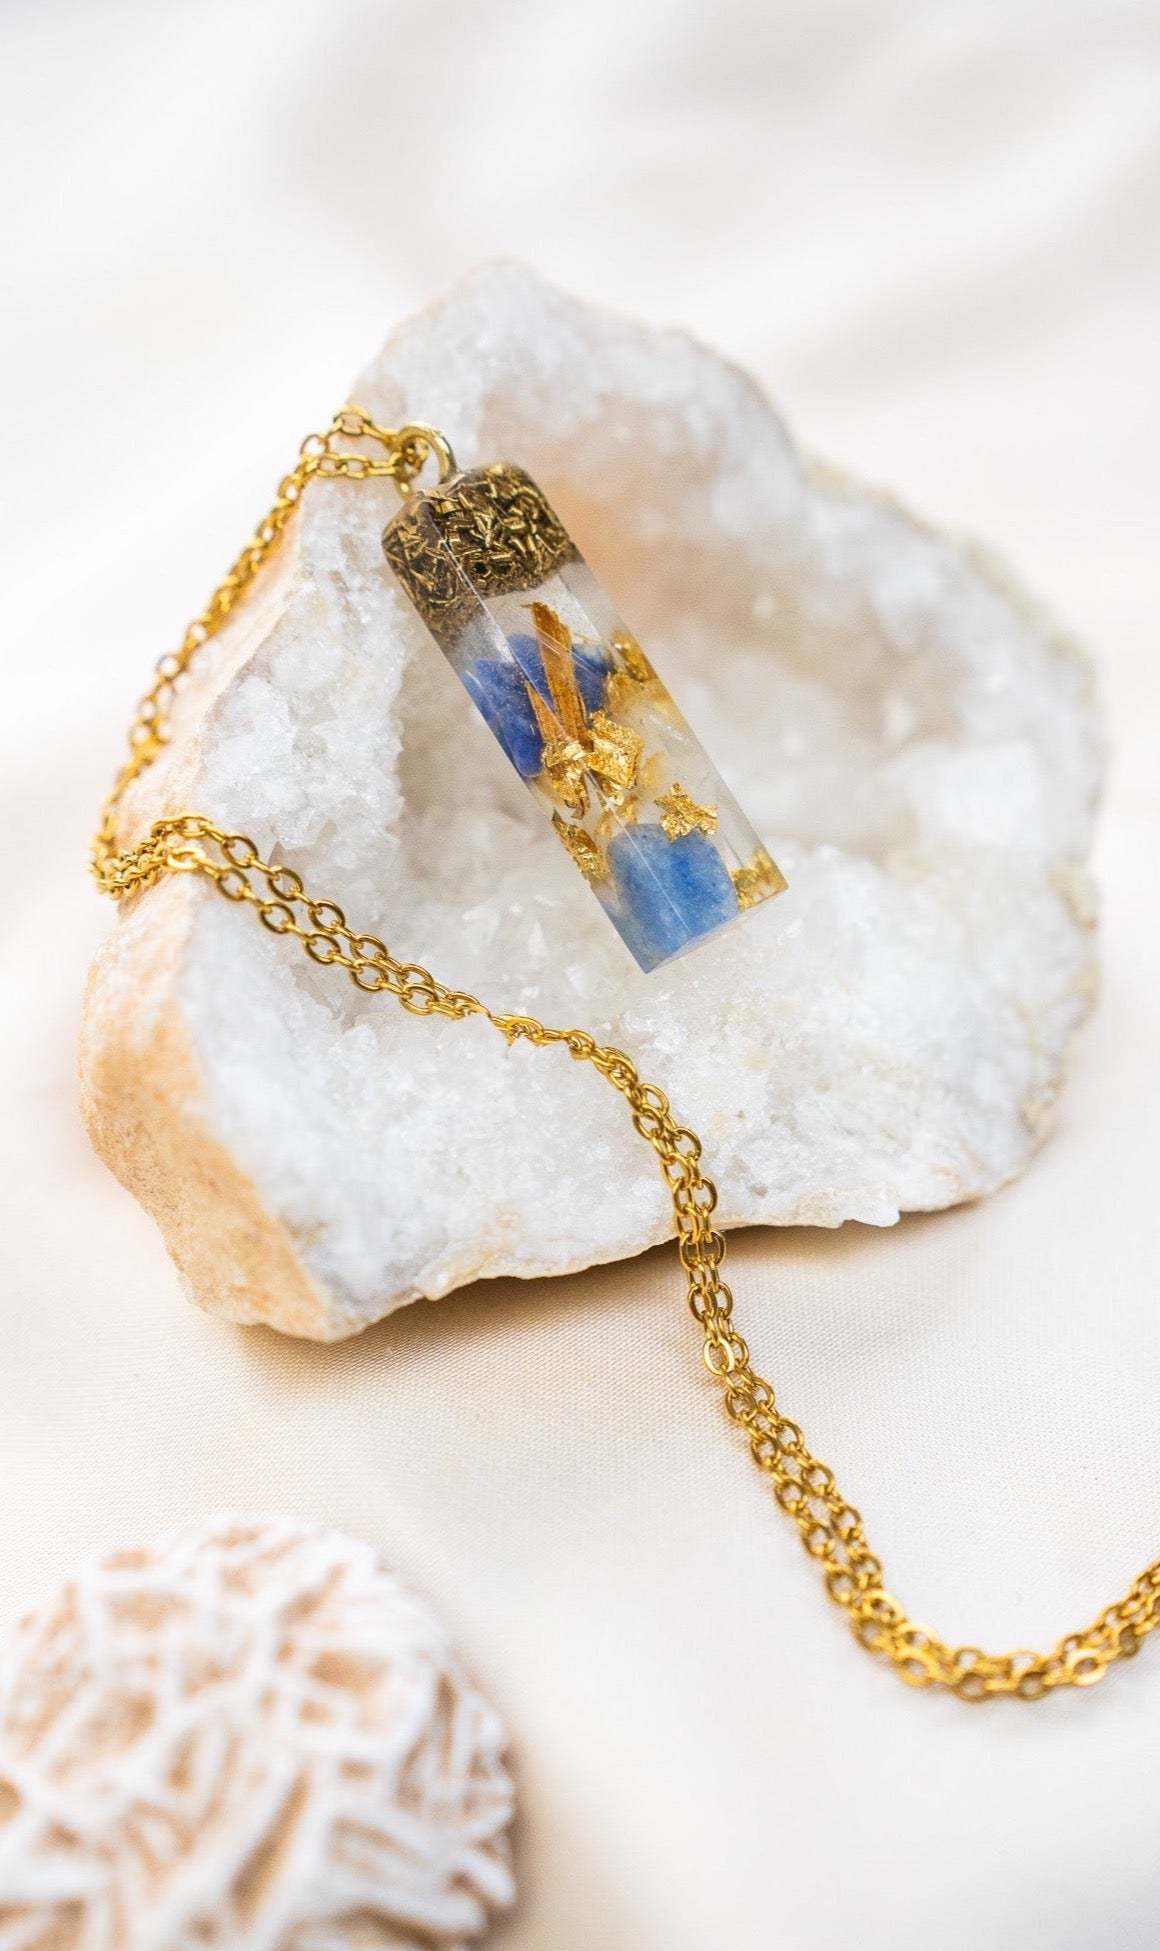 Sky God(dess) Crystal Healing Pendant For Creativity, Truth & Self-Expression